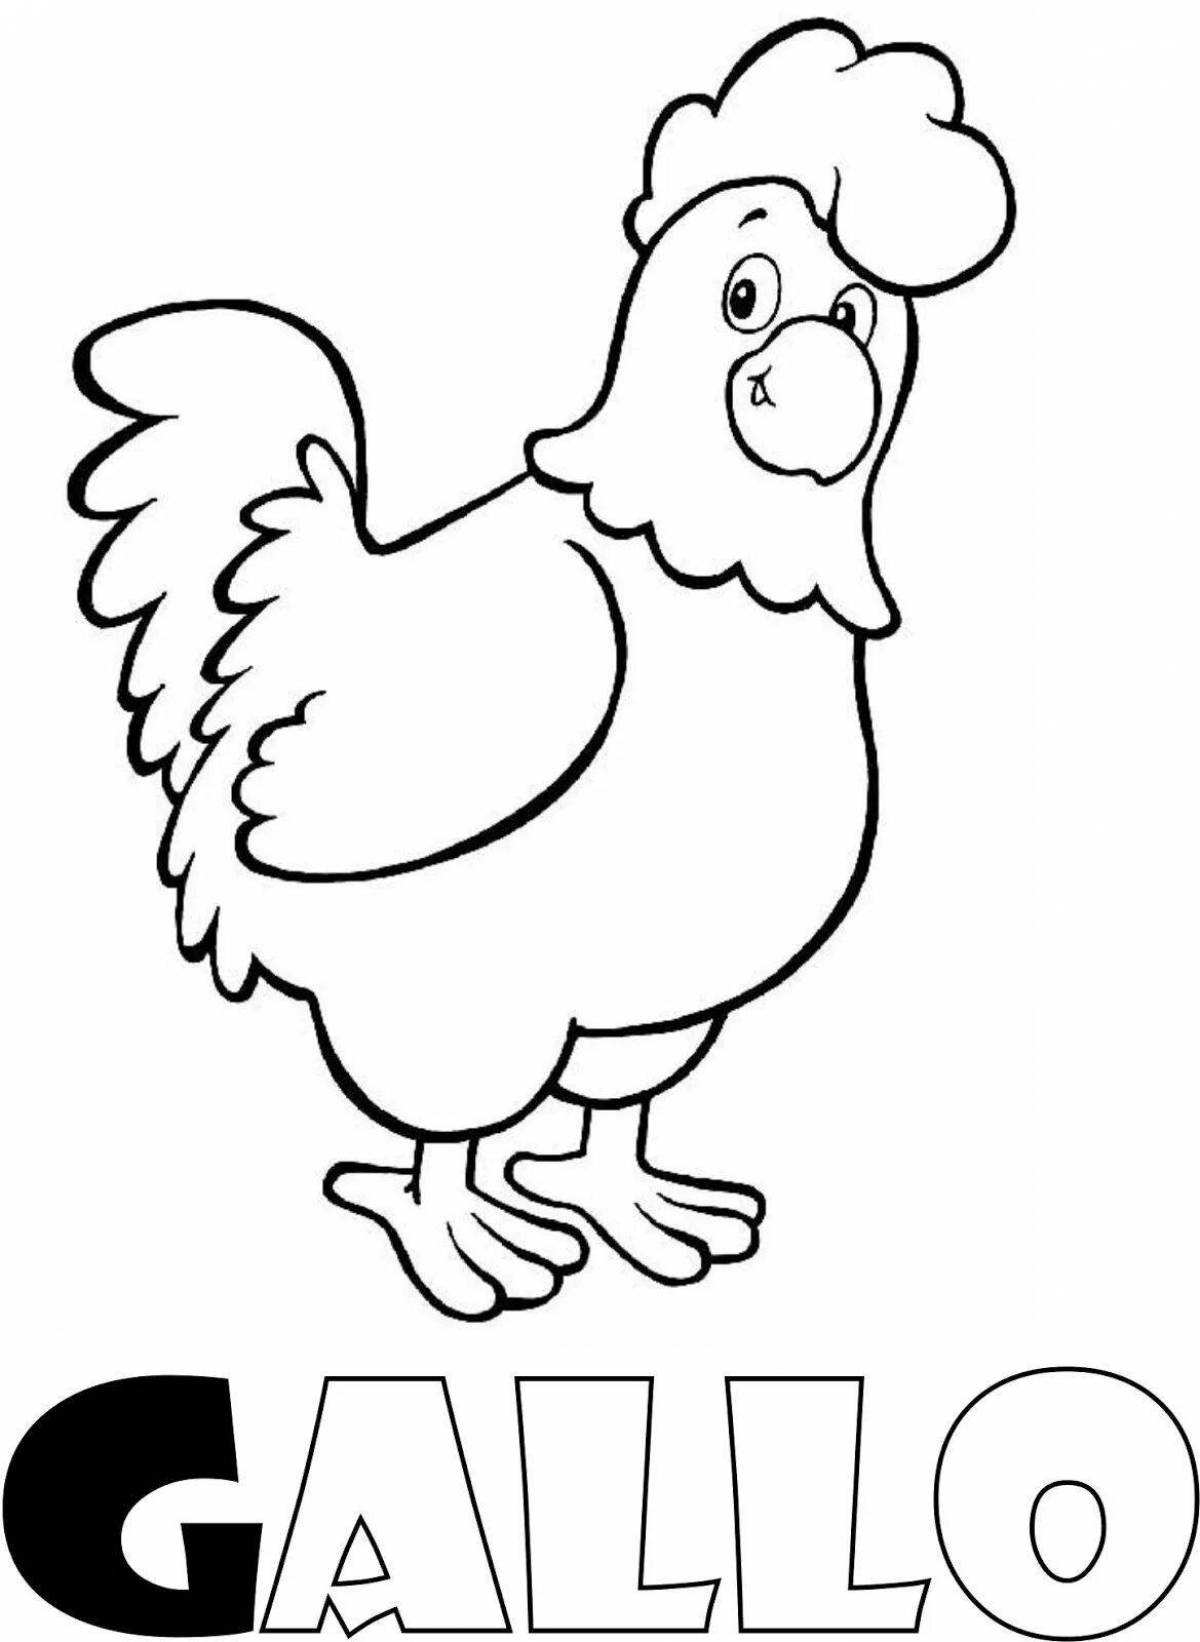 Coloring book magic cockerel for kids 2-3 years old